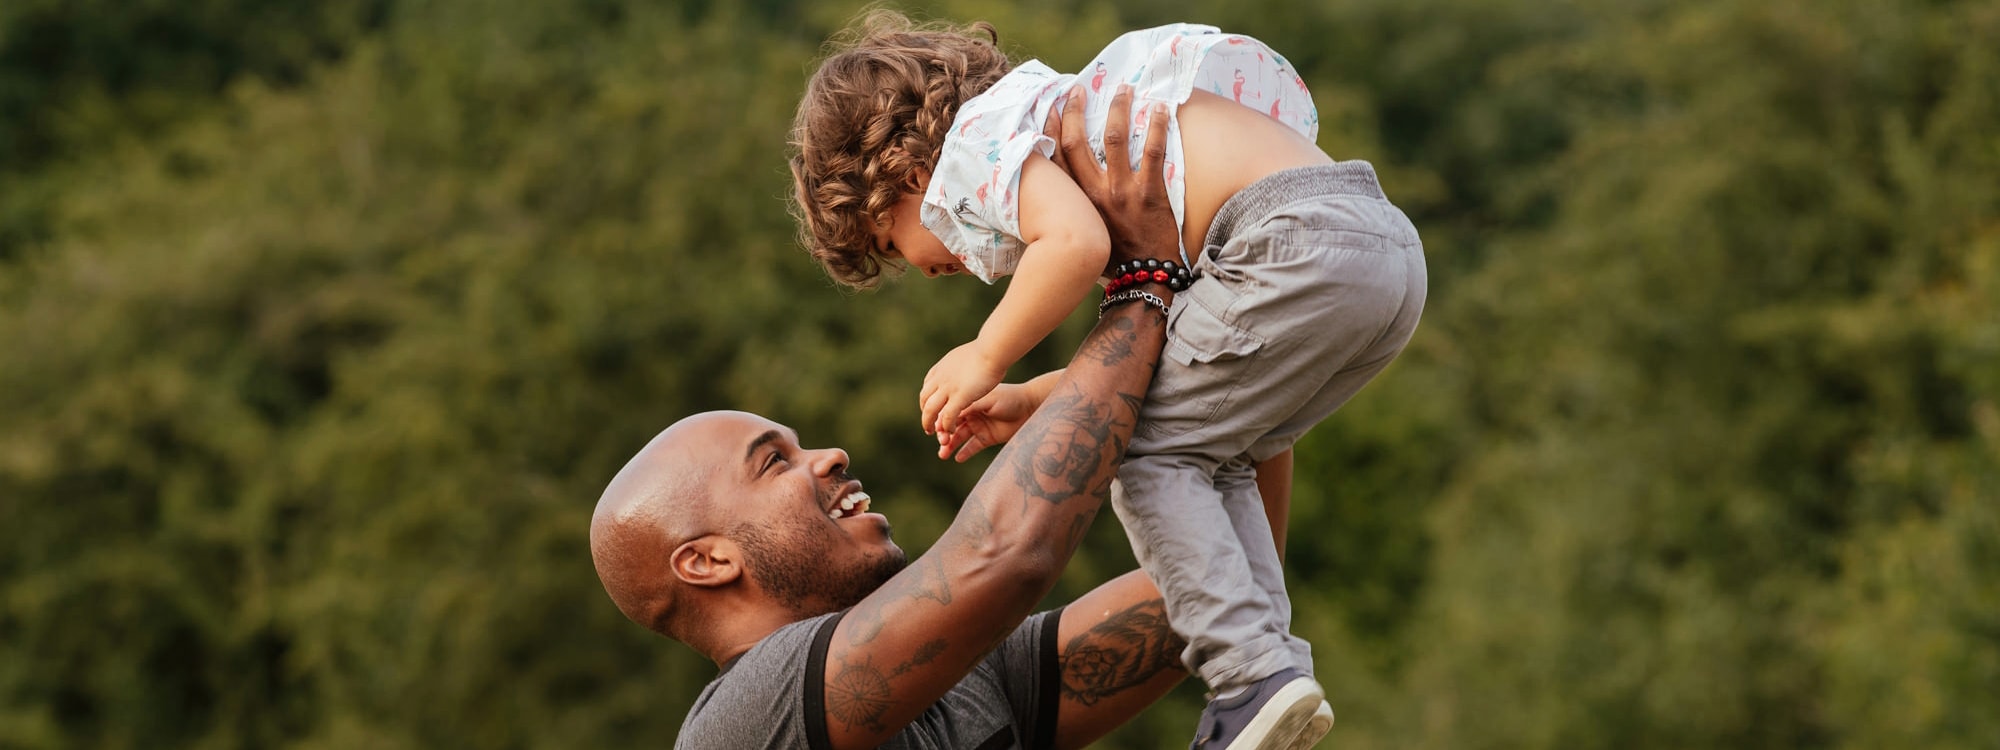 Dad holds young son in the air in Cute Family Photography Moment